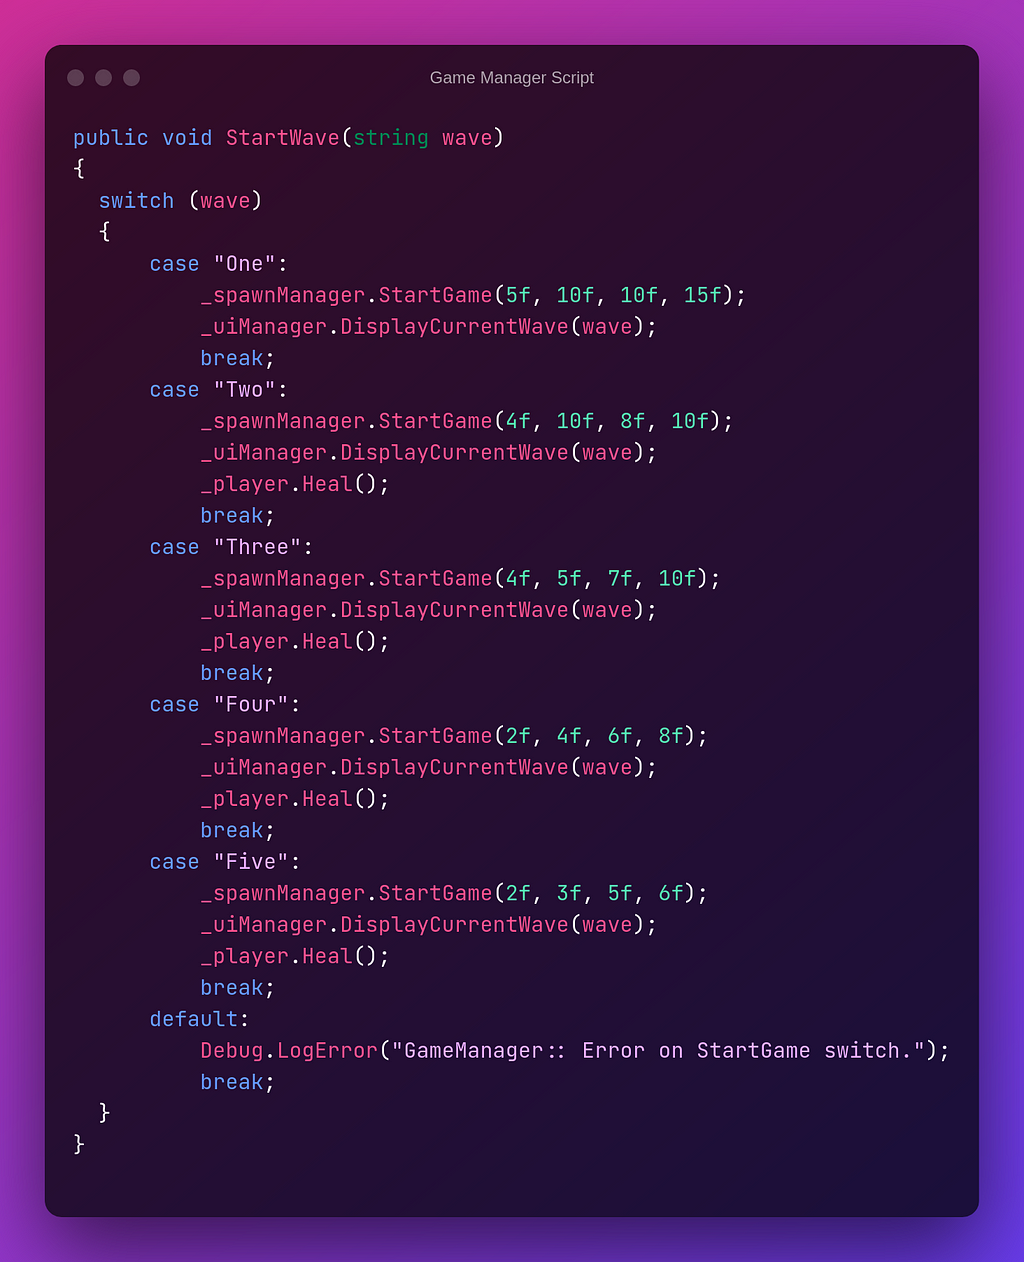 Game manager script showing a switch statement to set the different waves.